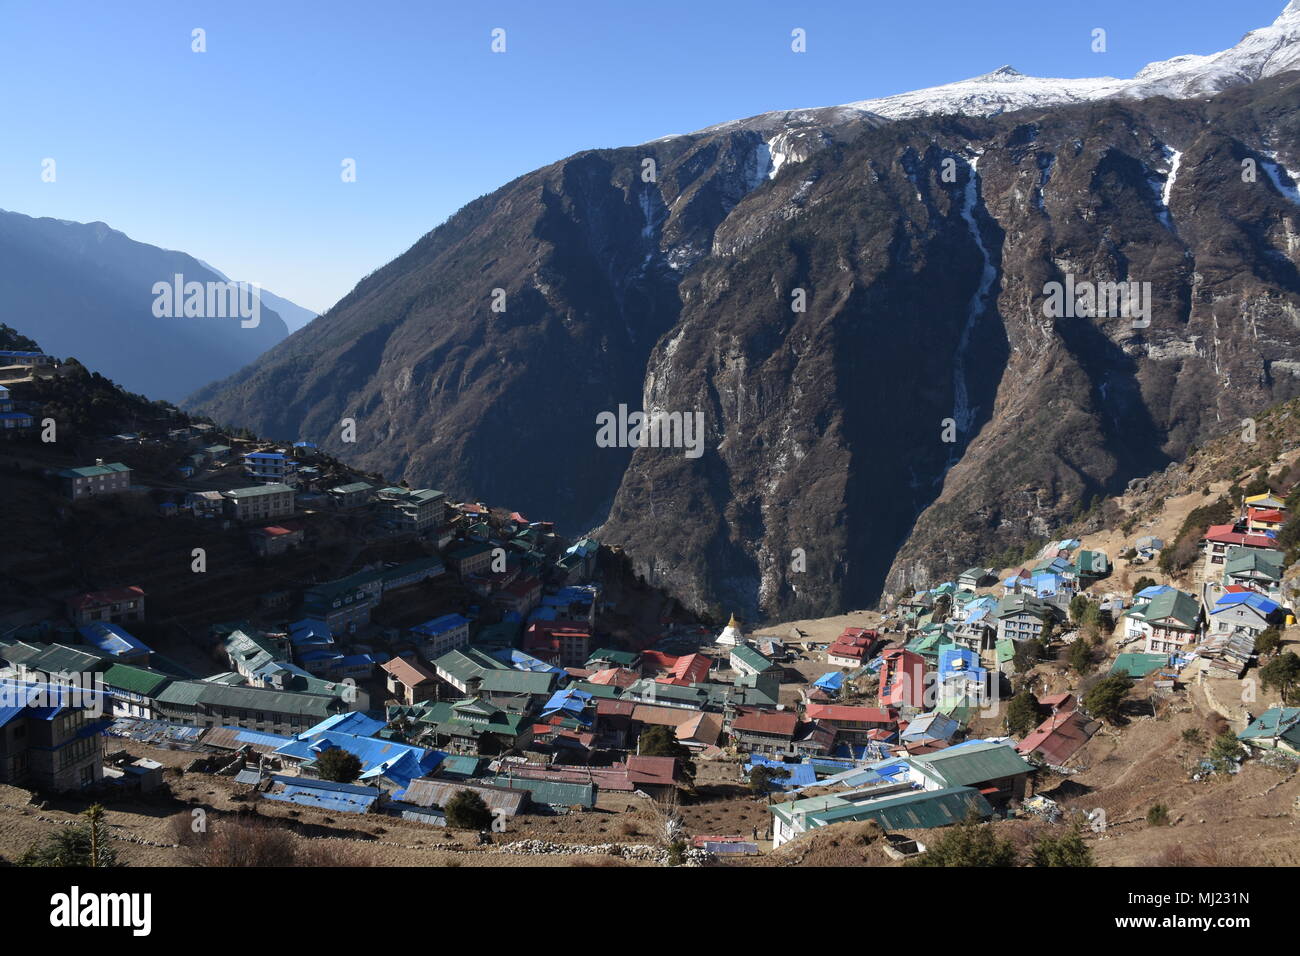 View of Namche Bazaar from an elevated position Stock Photo